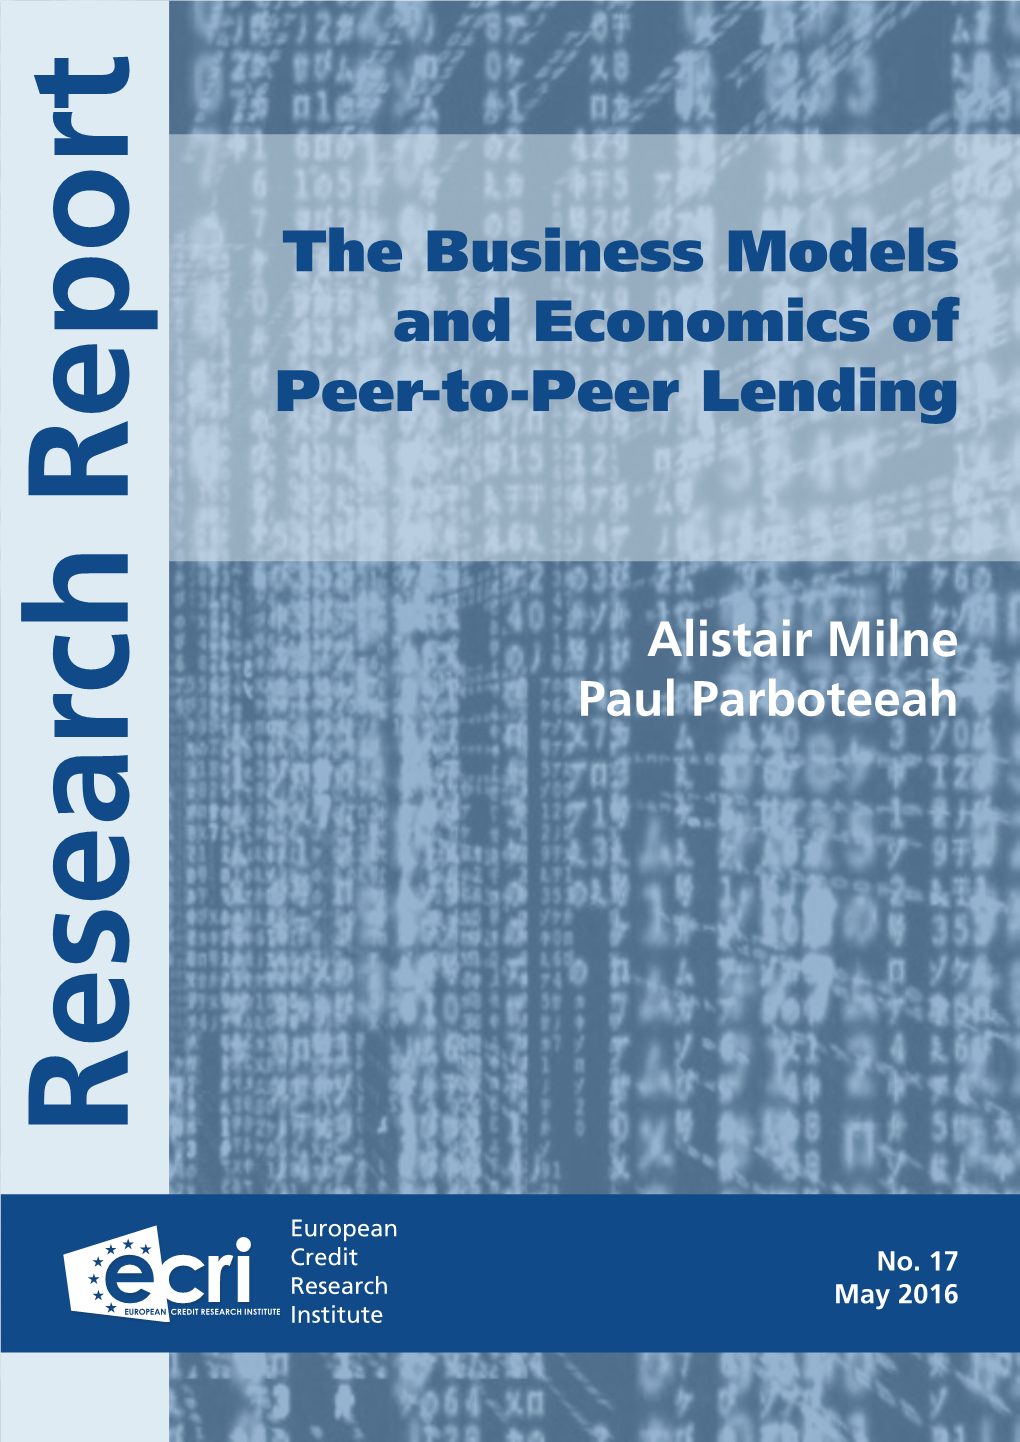 The Business Models and Economics of Peer-To-Peer Lending